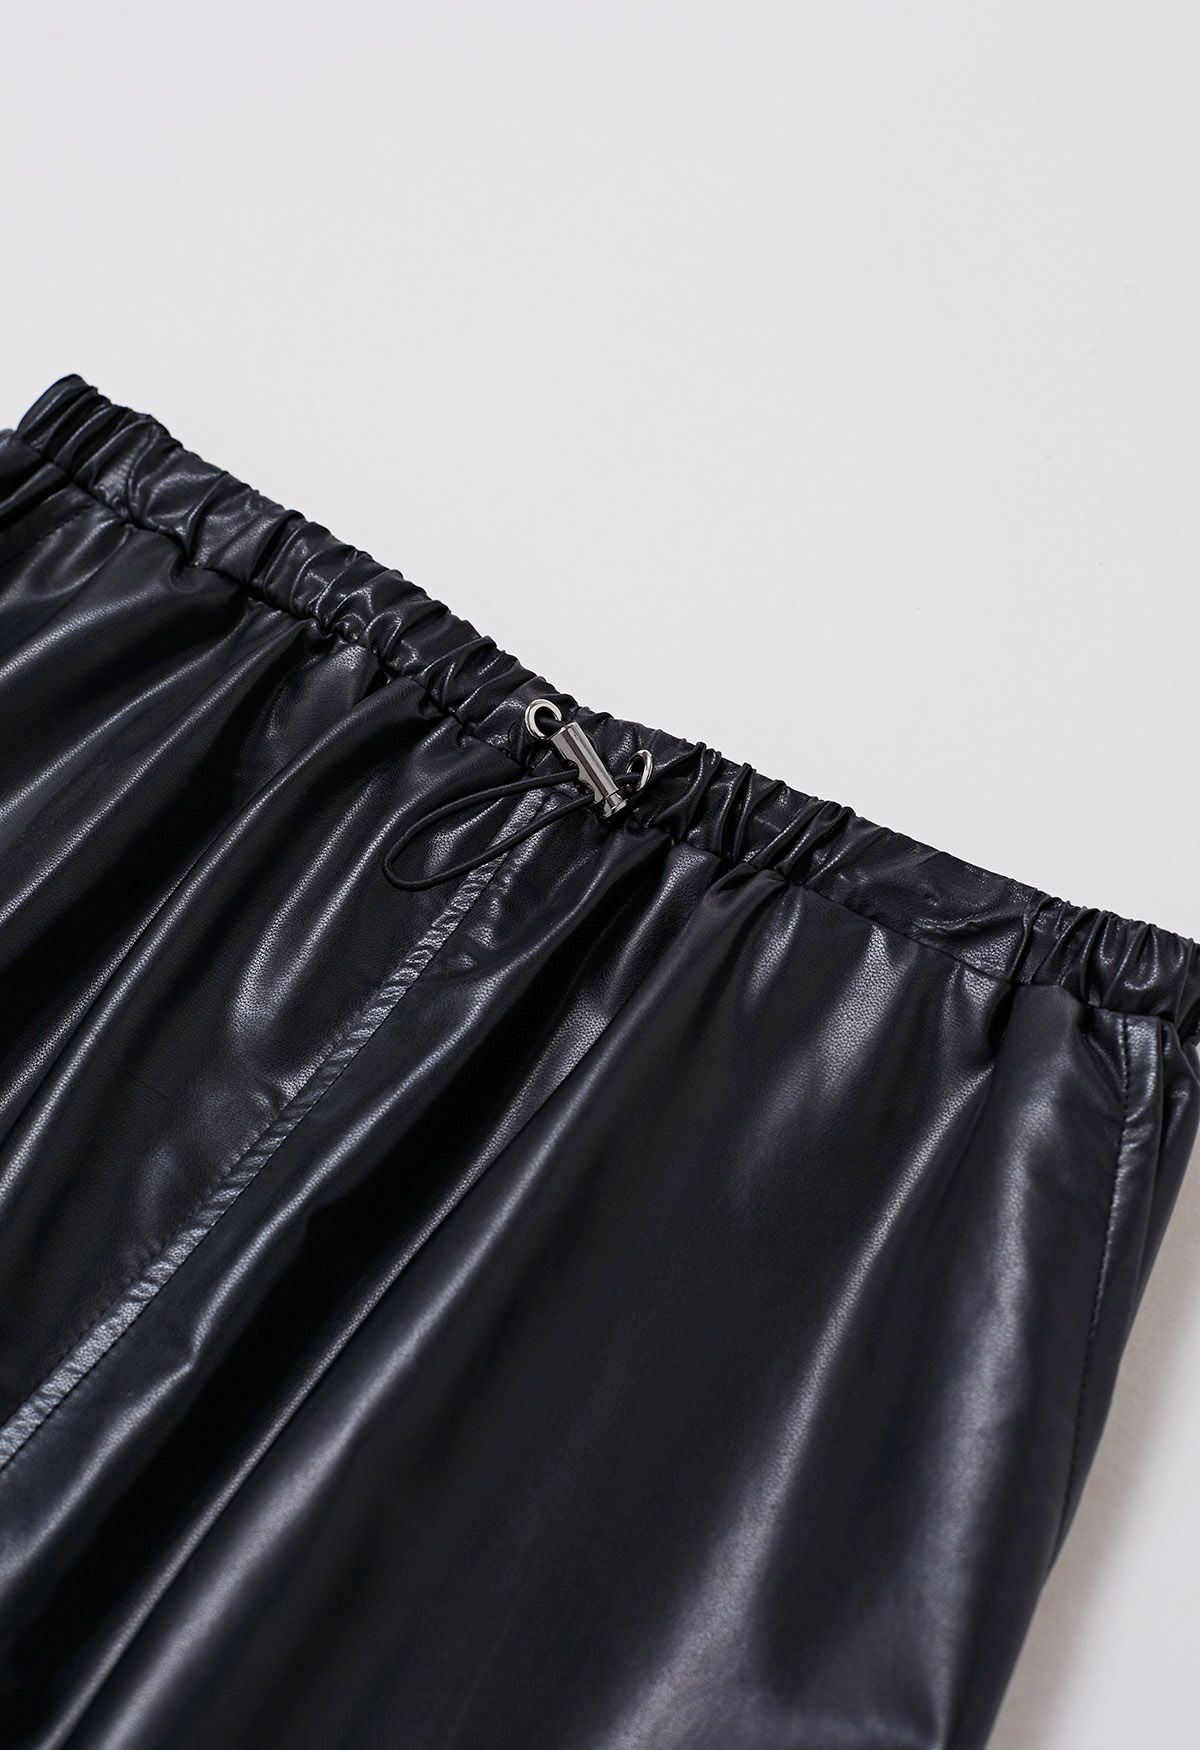 Faux Leather Cargo Maxi Skirt in Black